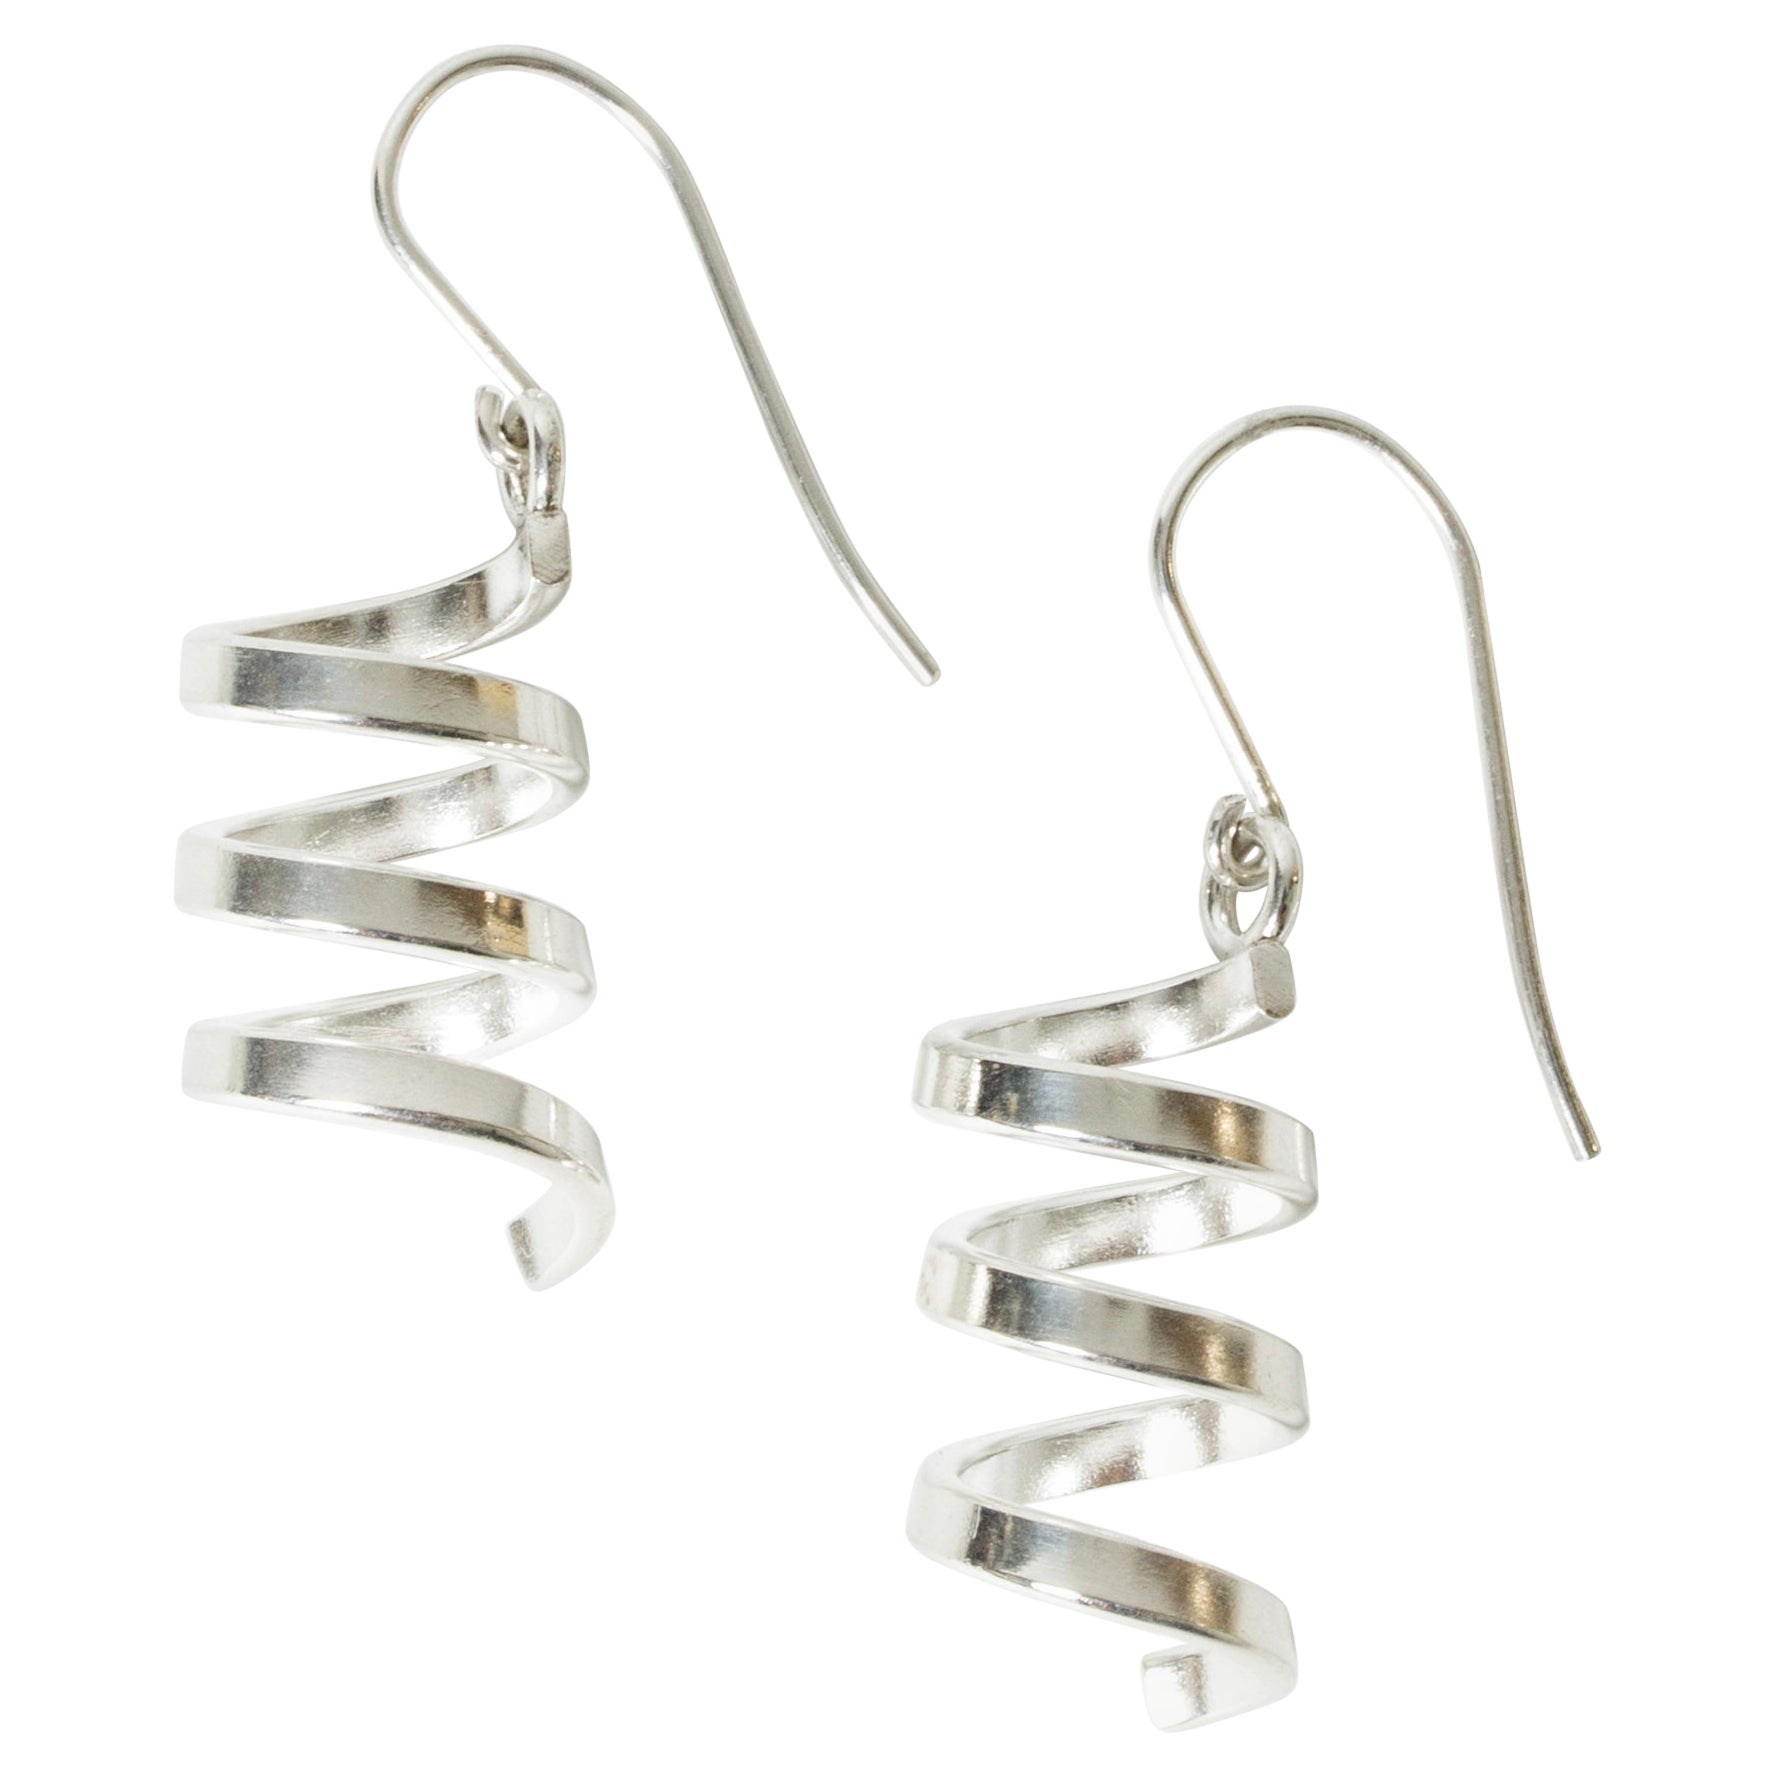 Midcentury Vintage silver earrings by Cecilia Johansson, Sweden, 1970s